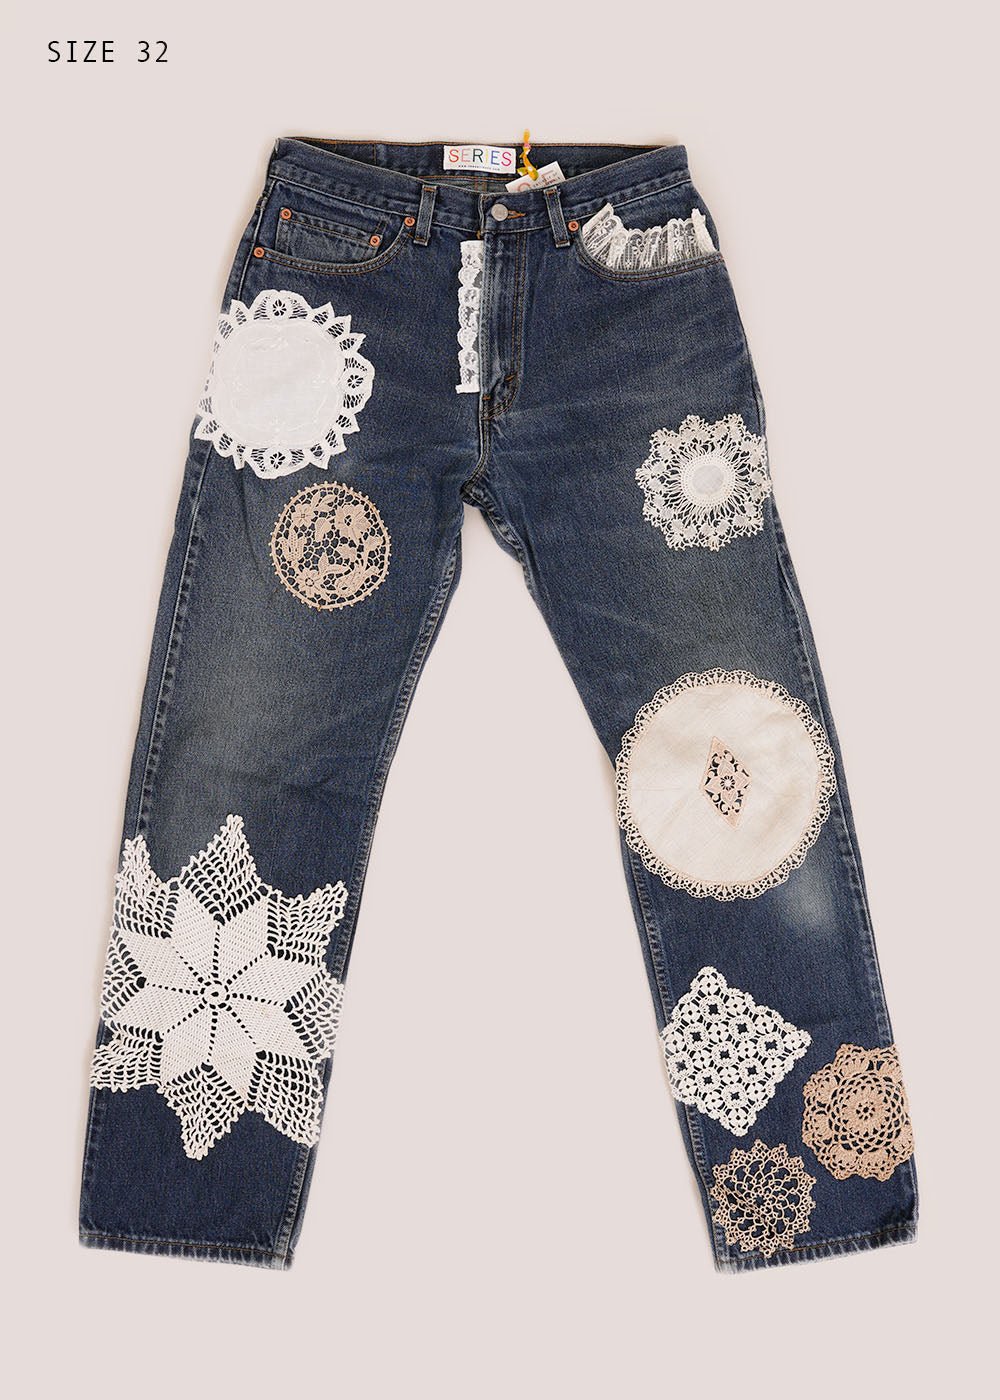 THE SERIES Doily Denim Pants - New Classics Studios Sustainable Ethical Fashion Canada